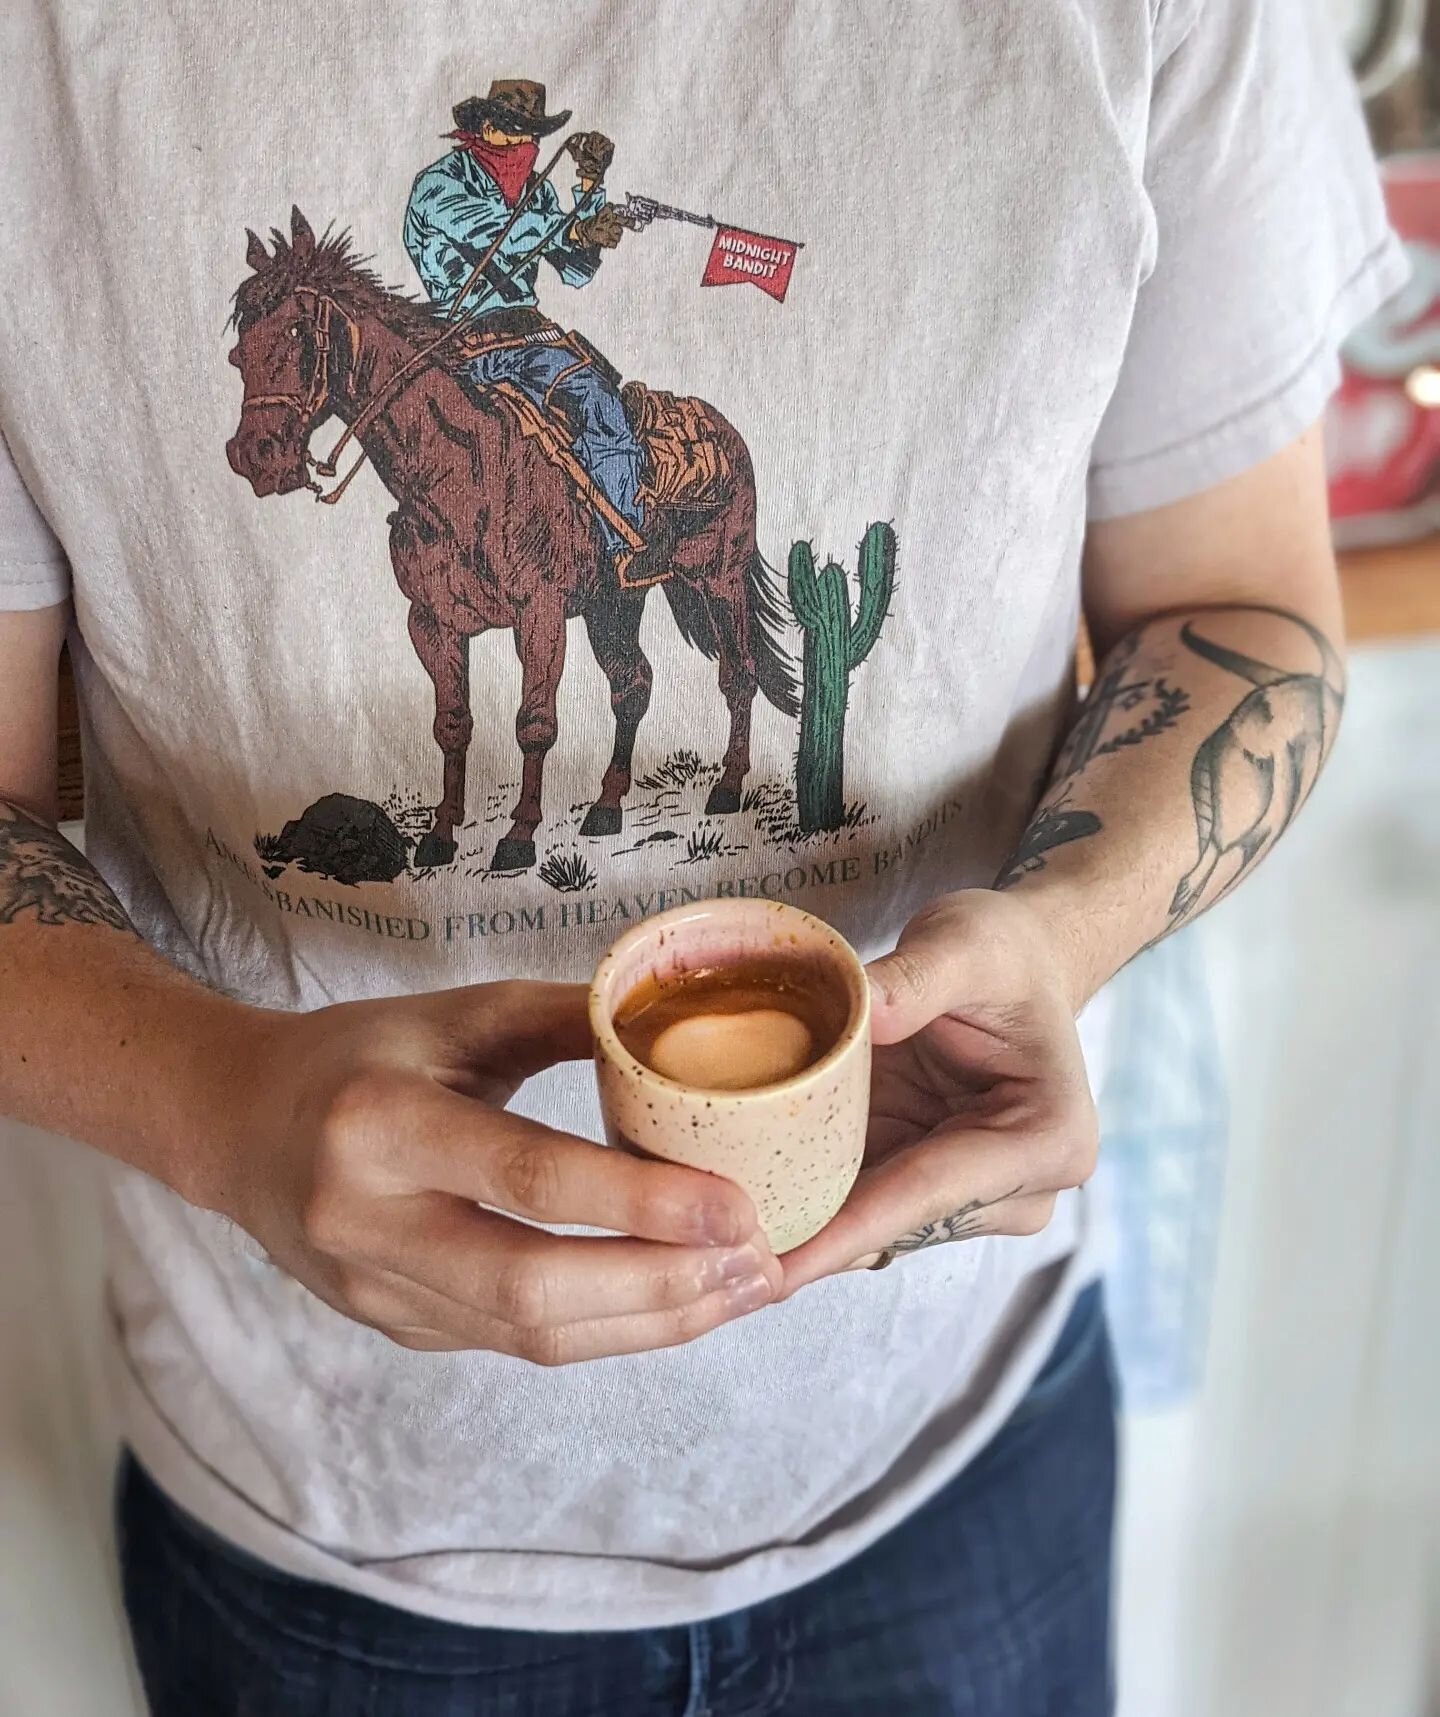 🗣️ Do y'all have macchiatos?

Why yes, yes we do. And they look like this. Double shot of silky smooth espresso and just a ✨drop✨ of milk. 

If you're looking for something caramely and big and cold, no worries, we can do that too.